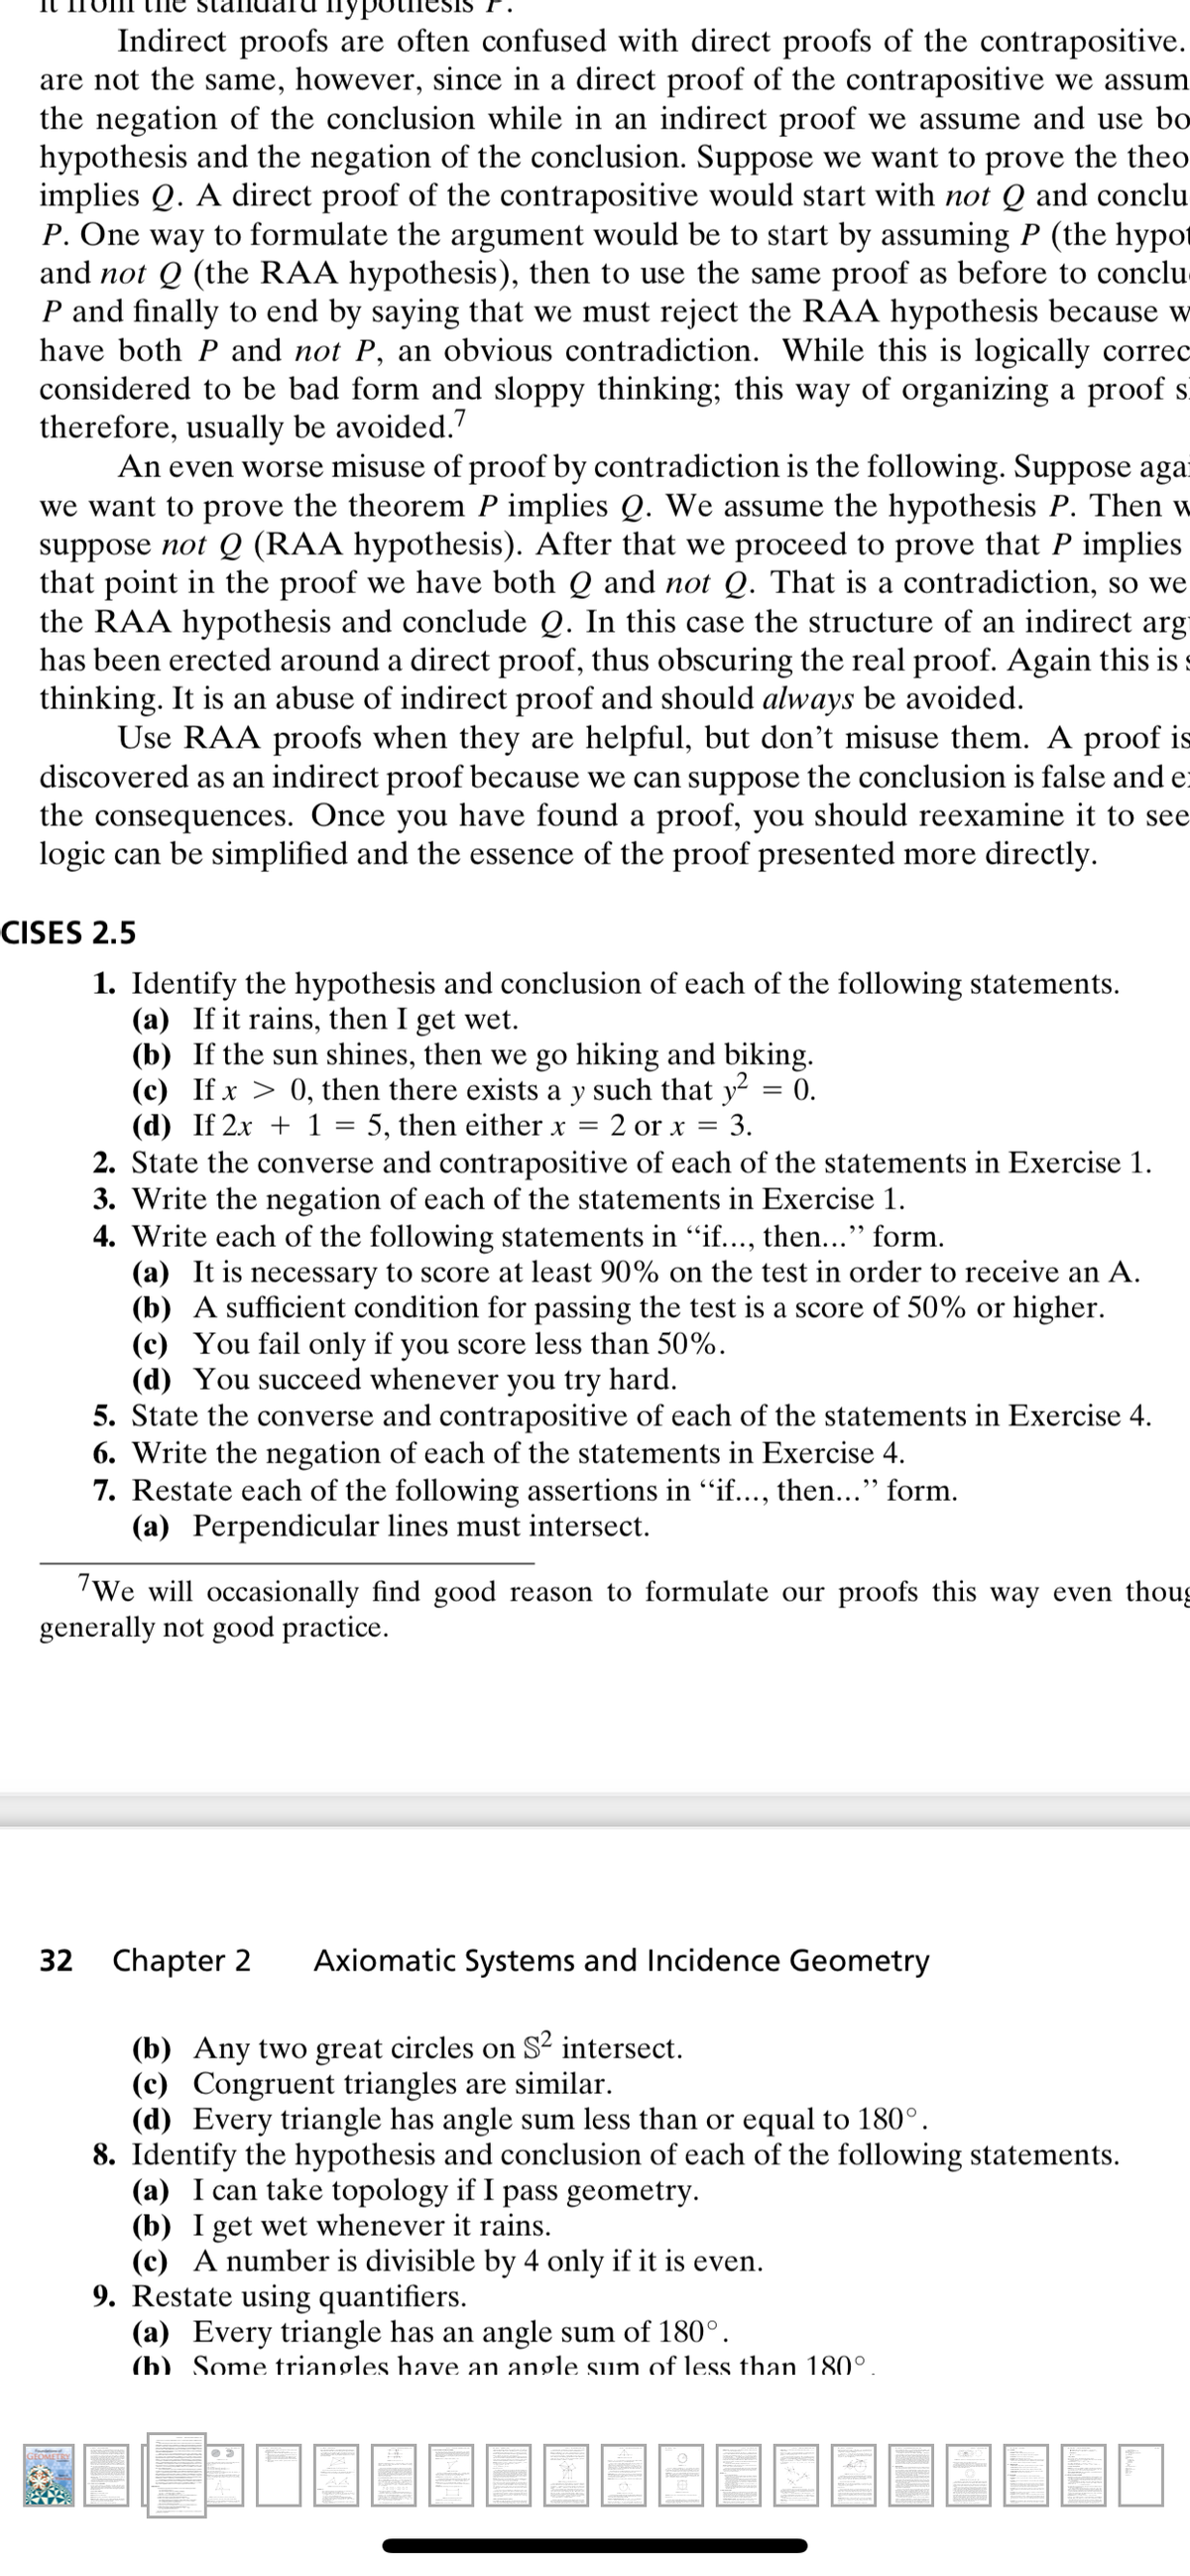 Indirect proofs are often confused with direct proofs of the contrapositive.
are not the same, however, since in a direct proof of the contrapositive we assum
the negation of the conclusion while in an indirect proof we assume and use bo
hypothesis and the negation of the conclusion. Suppose we want to prove the theo
implies Q. A direct proof of the contrapositive would start with not Q and conclu
P. One way to formulate the argument would be to start by assuming P (the hypot
and not Q (the RAA hypothesis), then to use the same proof as before to conclu
P and finally to end by saying that we must reject the RAA hypothesis because w
have both P and not P, an obvious contradiction. While this is logically correc
considered to be bad form and sloppy thinking; this way of organizing a proof sĩ
therefore, usually be avoided.7
An even worse misuse of proof by contradiction is the following. Suppose agar
we want to prove the theorem P implies Q. We assume the hypothesis P. Then w
suppose not Q (RAA hypothesis). After that we proceed to prove that P implies
that point in the proof we have both Q and not Q. That is a contradiction, so we
the RAA hypothesis and conclude Q. In this case the structure of an indirect arg
has been erected around a direct proof, thus obscuring the real proof. Again this is
thinking. It is an abuse of indirect proof and should always be avoided.
Use RAA proofs when they are helpful, but don't misuse them. A proof is
discovered as an indirect proof because we can suppose the conclusion is false and e
the consequences. Once you have found a proof, you should reexamine it to see
logic can be simplified and the essence of the proof presented more directly.
CISES 2.5
1. Identify the hypothesis and conclusion of each of the following statements.
(a) If it rains, then I get wet.
(b) If the sun shines, then we go hiking and biking.
(c) If x > 0, then there exists a y such that y² = 0.
(d) If 2x + 1 = 5, then either x
2. State the converse and contrapositive of each of the statements in Exercise 1.
3. Write the negation of each of the statements in Exercise 1.
4. Write each of the following statements in "if..., then..." form.
(a) It is necessary to score at least 90% on the test in order to receive an A.
(b) A sufficient condition for passing the test is a score of 50% or higher.
(c) You fail only if you score less than 50%.
(d) You succeed whenever you try hard.
5. State the converse and contrapositive of each of the statements in Exercise 4.
6. Write the negation of each of the statements in Exercise 4.
7. Restate each of the following assertions in "if..., then..." form.
(a) Perpendicular lines must intersect.
2 or x
3.
We will occasionally find good reason to formulate our proofs this way even thoug
generally
good practice.
32 Chapter 2
Axiomatic Systems and Incidence Geometry
(b) Any two great circles on S² intersect.
(c) Congruent triangles are similar.
(d) Every triangle has angle sum less than or equal to 180°.
8. Identify the hypothesis and conclusion of each of the following statements.
(a) I can take topology if I pass geometry.
(b) I get wet whenever it rains.
(c) A number is divisible by 4 only if it is even.
9. Restate using quantifiers.
(a) Every triangle has an angle sum of 180°.
(b) Some triangles have an angle sum of less than 180°.
